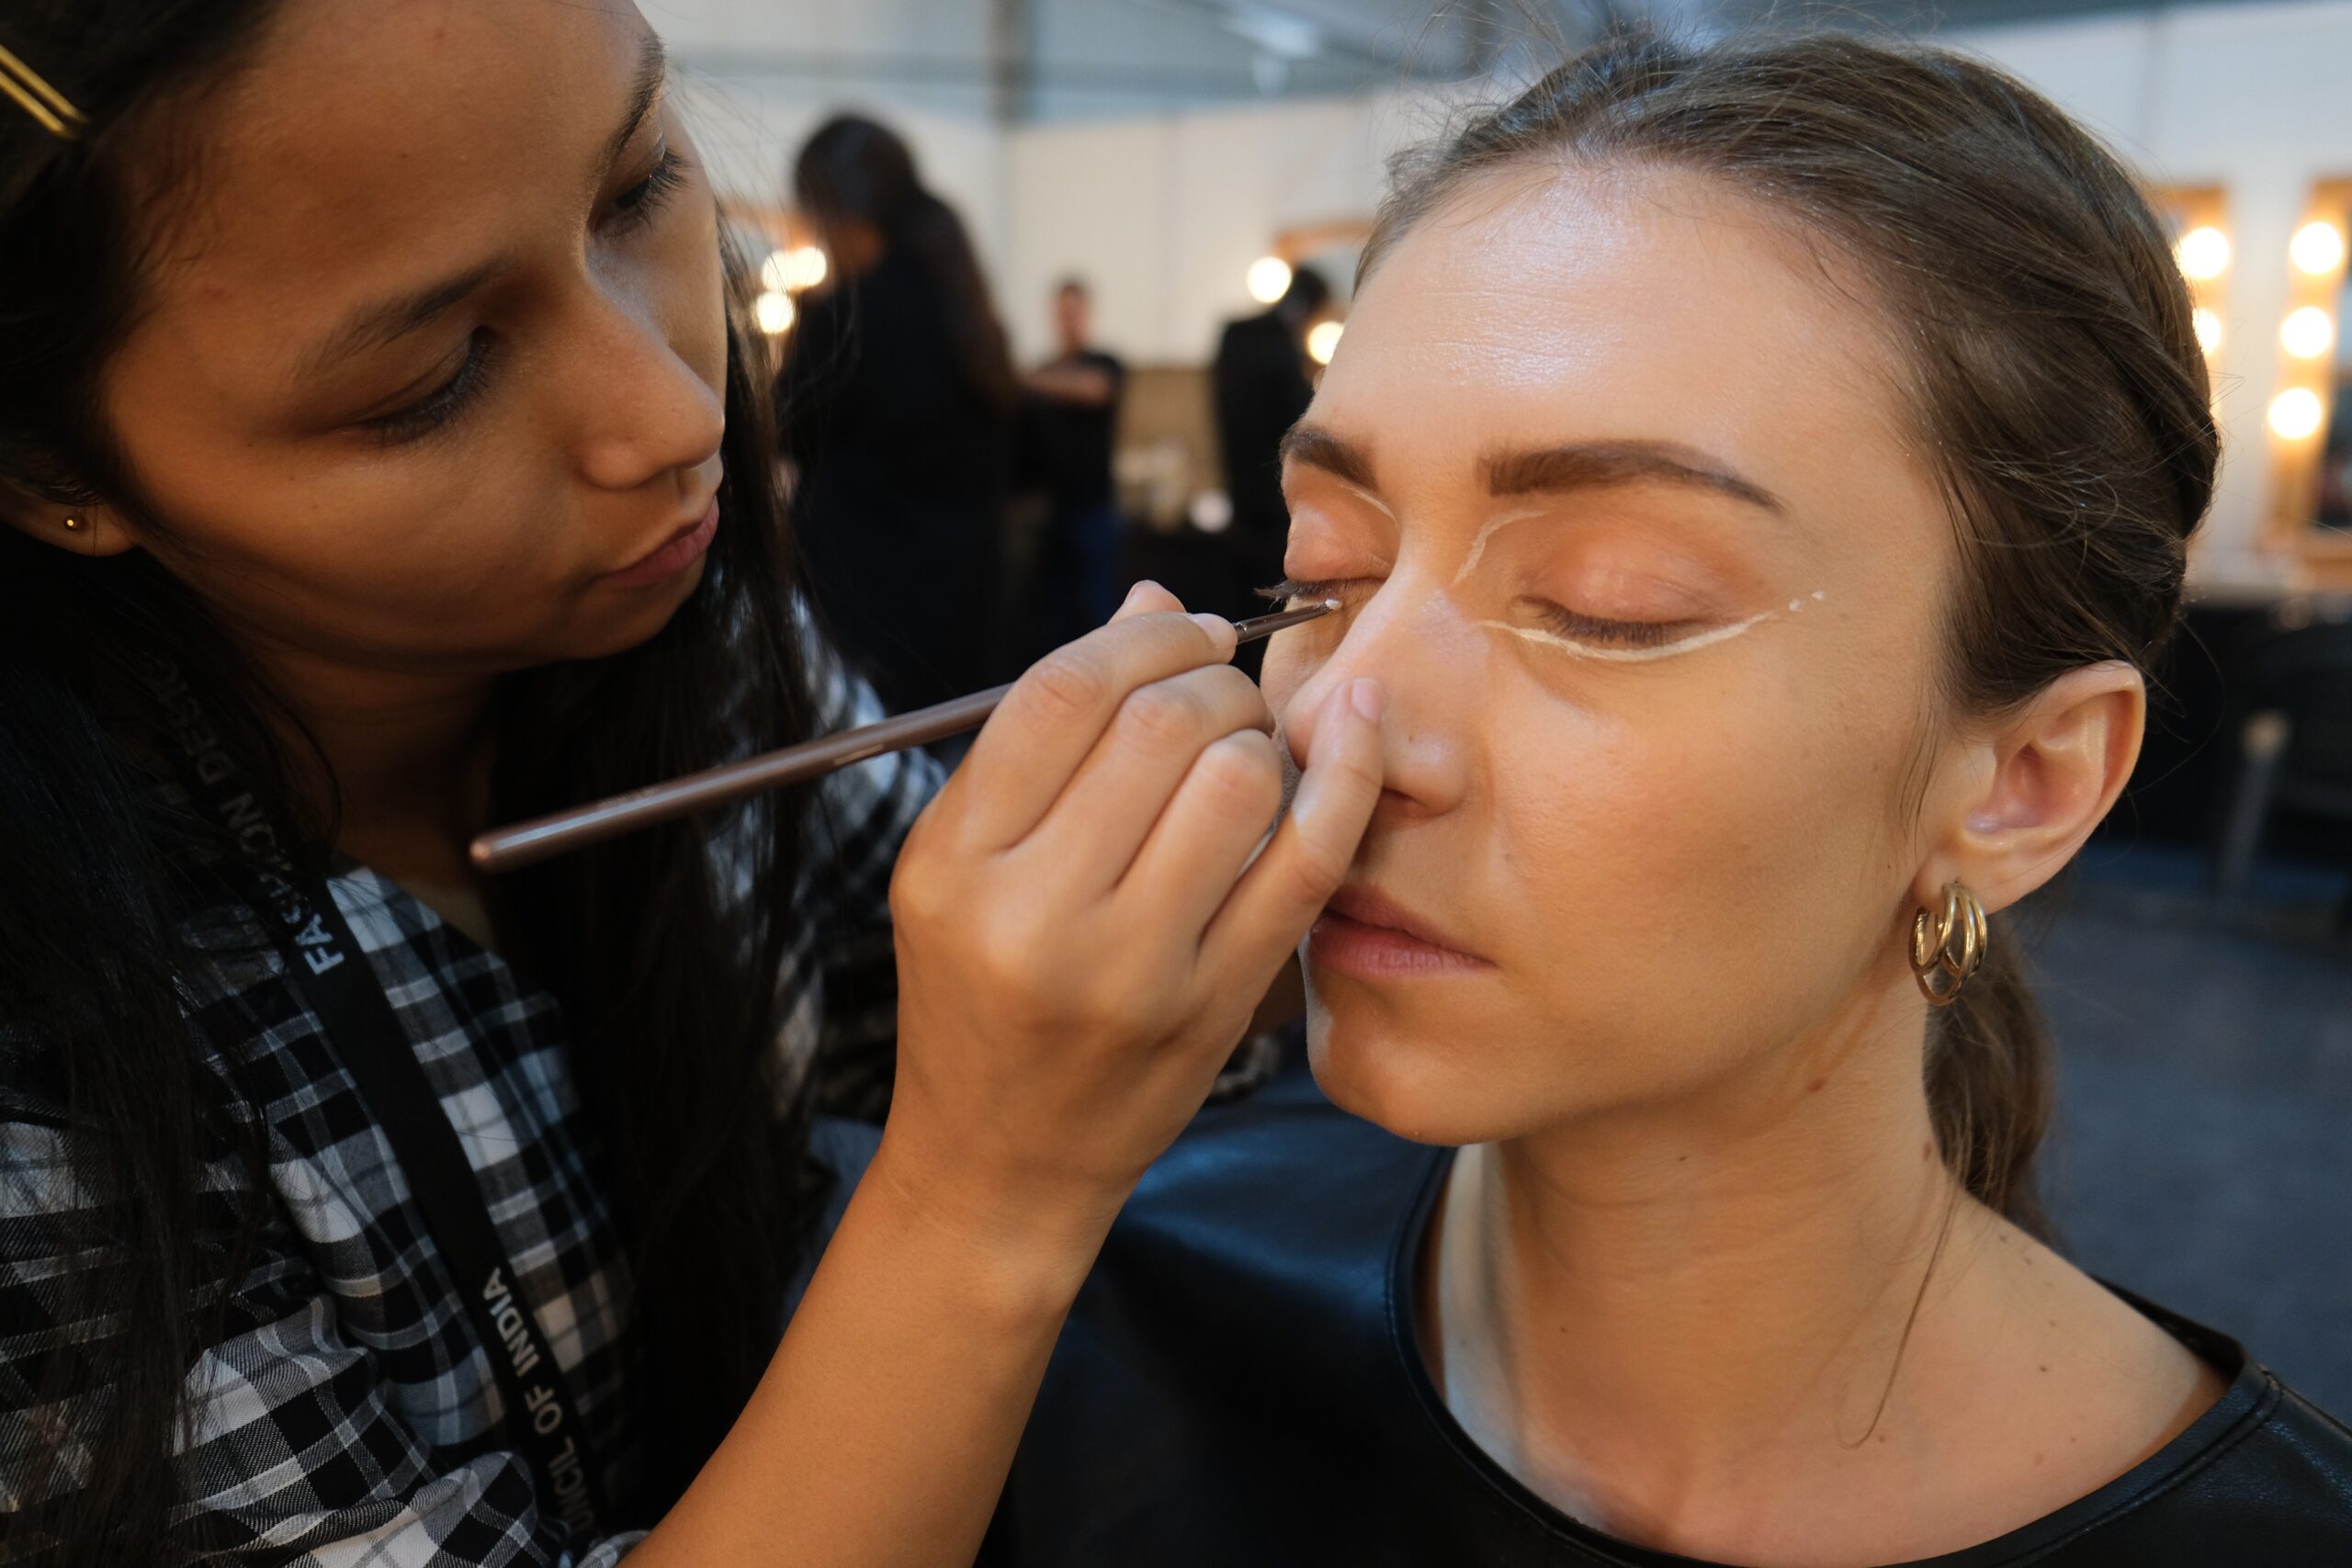 Being A Makeup Artist In 2021 | Challenges, What To Know Before Starting, e.t.c.